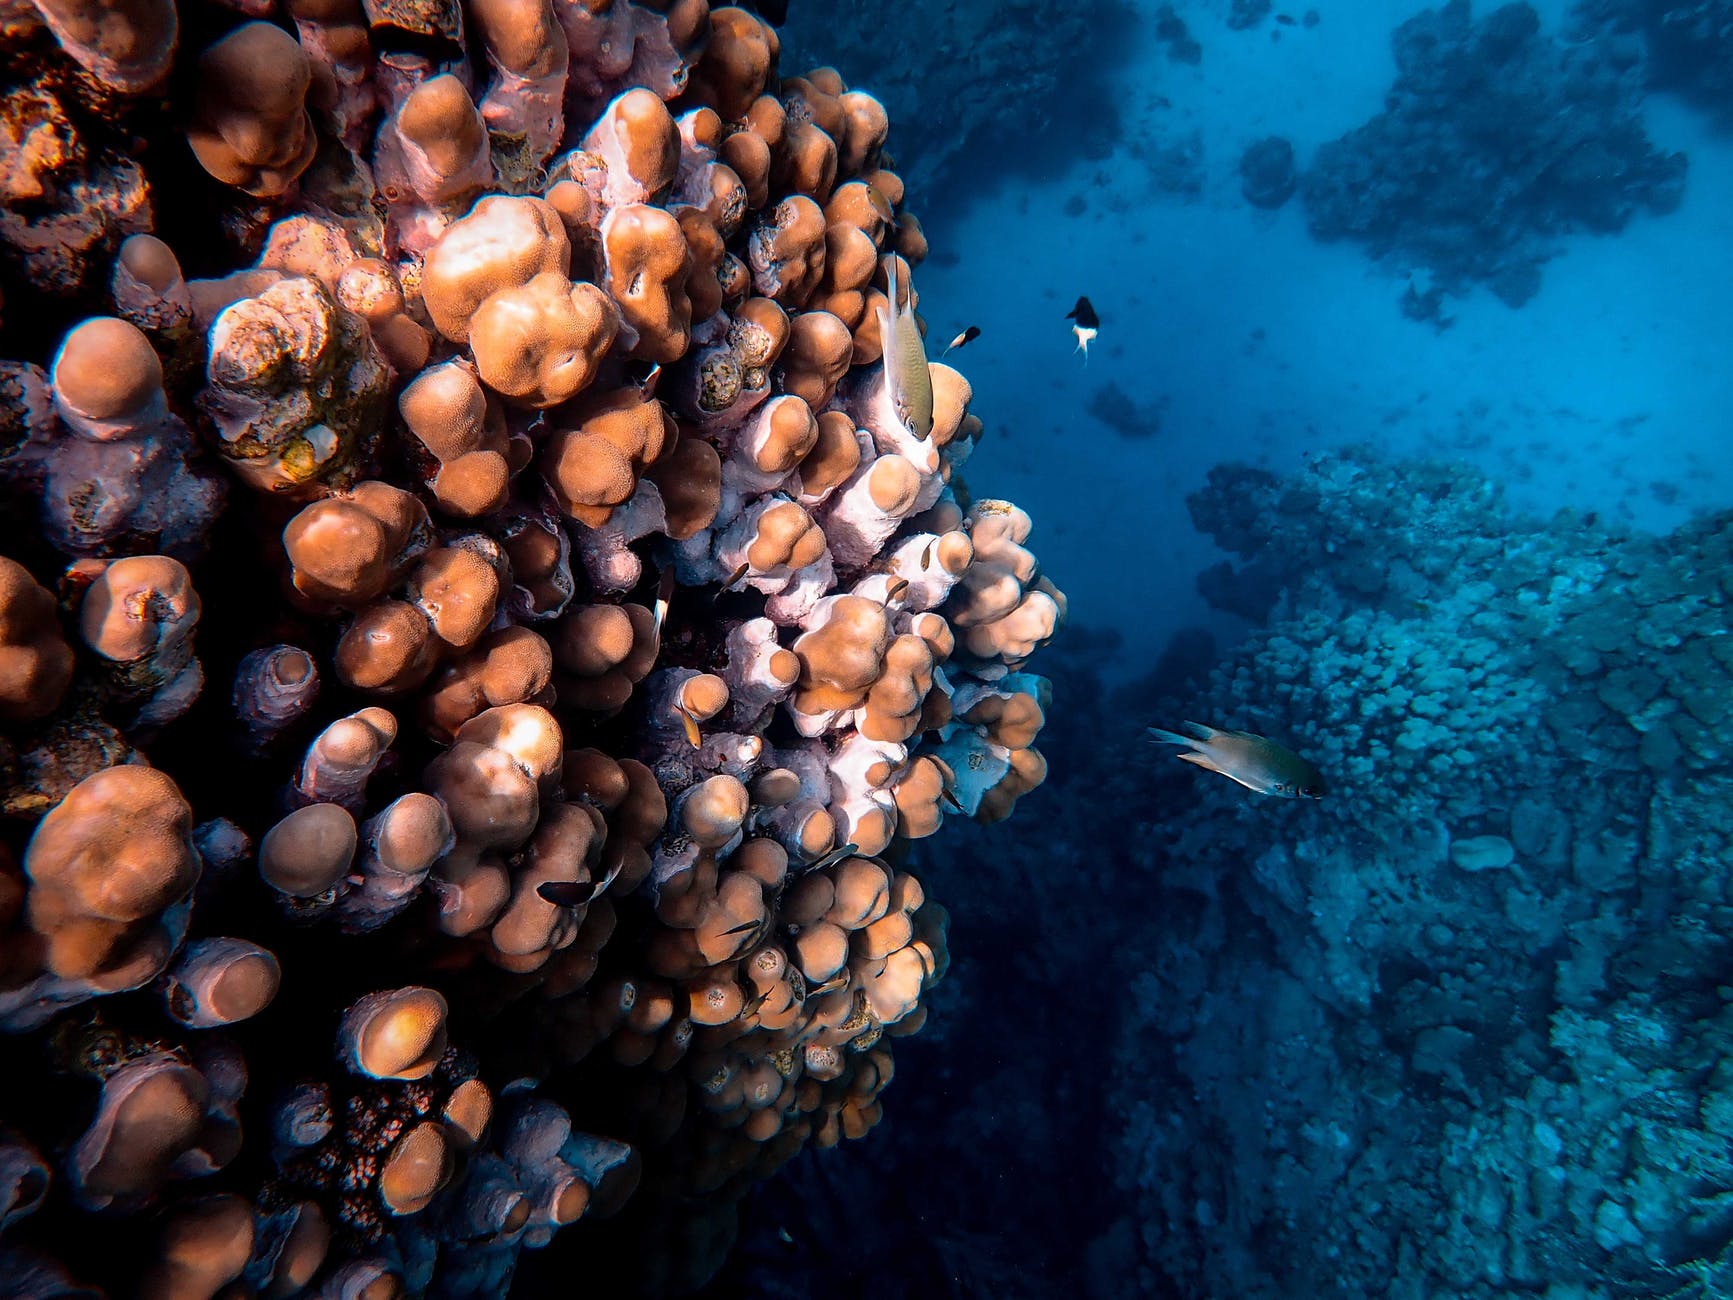 photo of fish and corals underwater